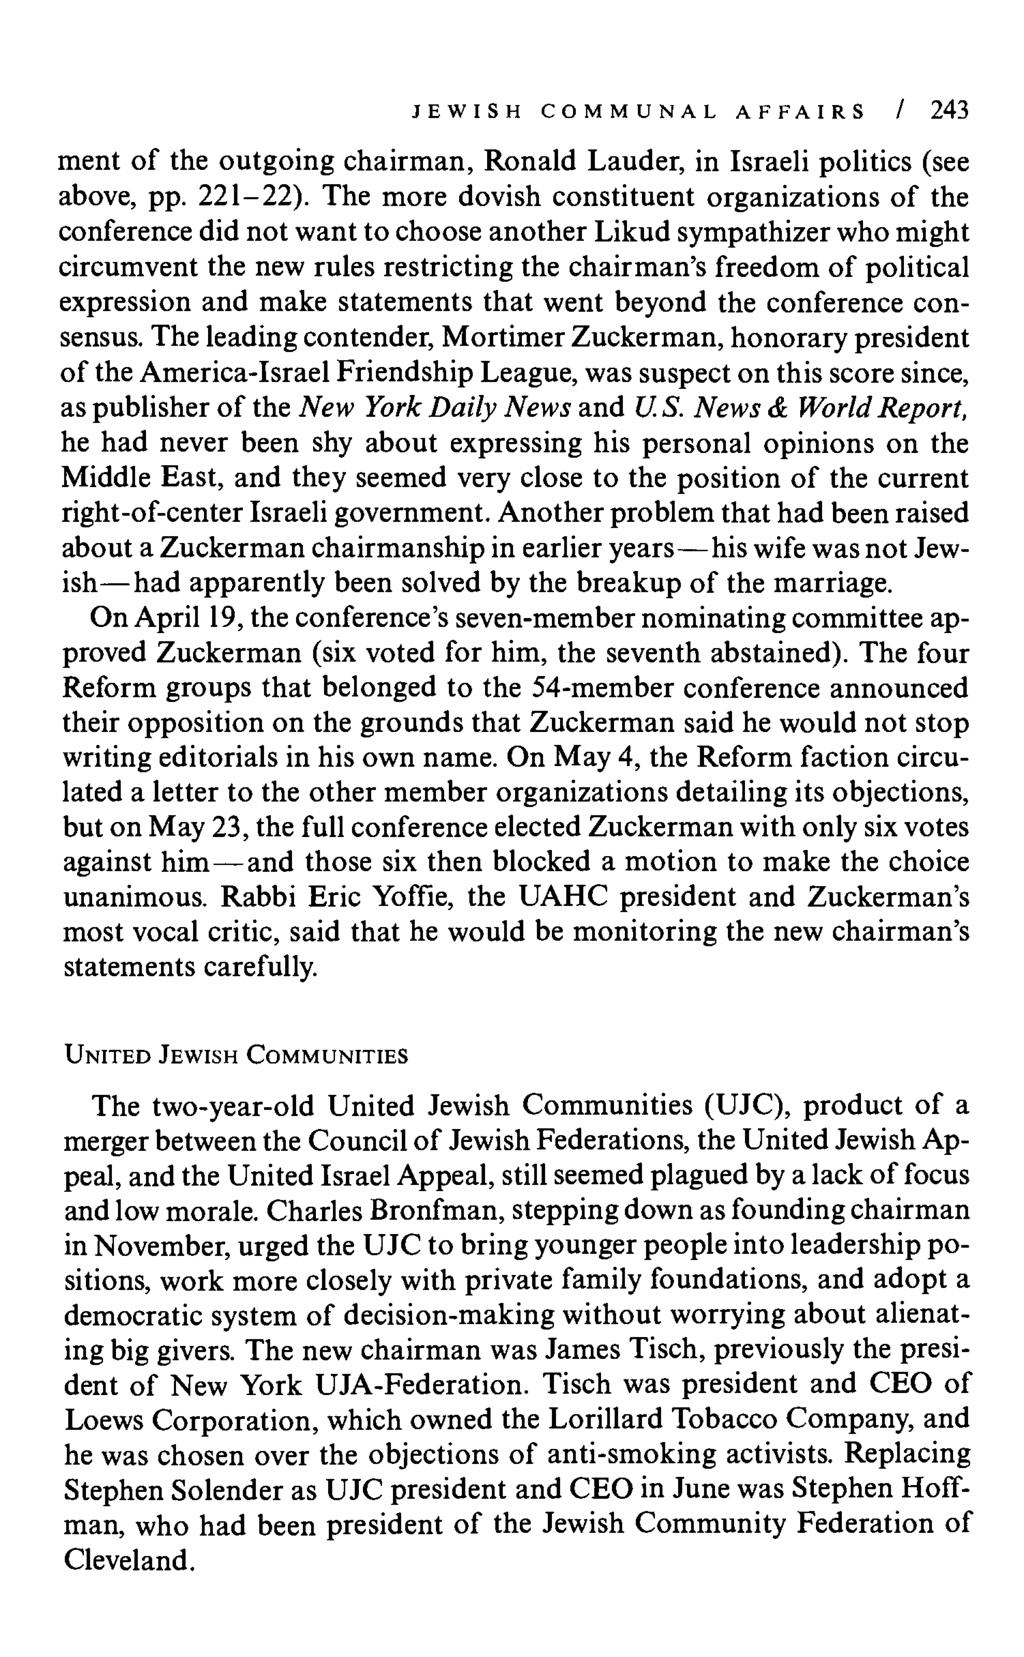 JEWISH COMMUNAL AFFAIRS / 243 ment of the outgoing chairman, Ronald Lauder, in Israeli politics (see above, pp. 221-22).